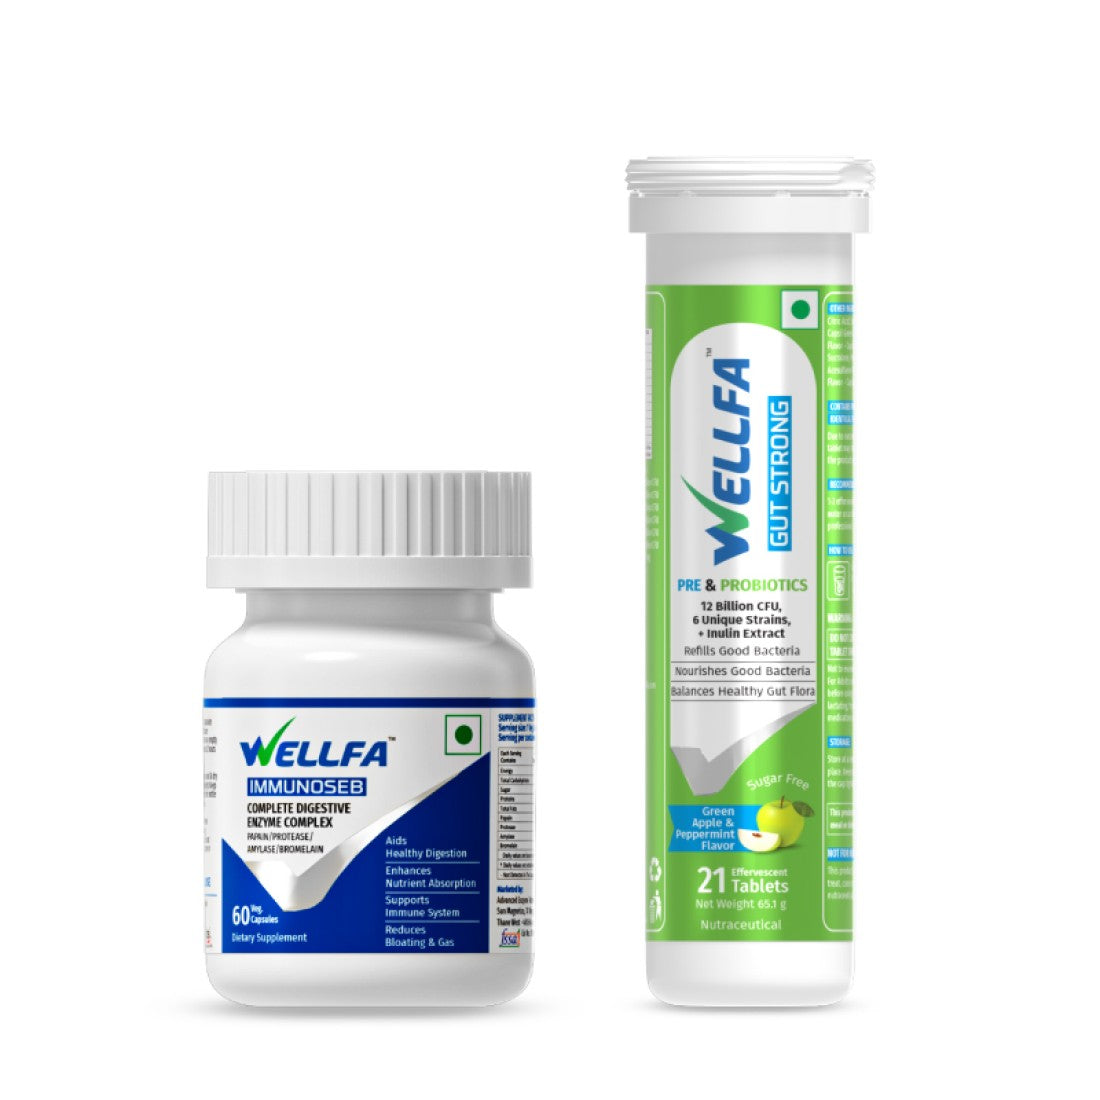 WELLFA ULTIMATE DIGESTIVE BUNDLE Effervescent Tablets and Capsules